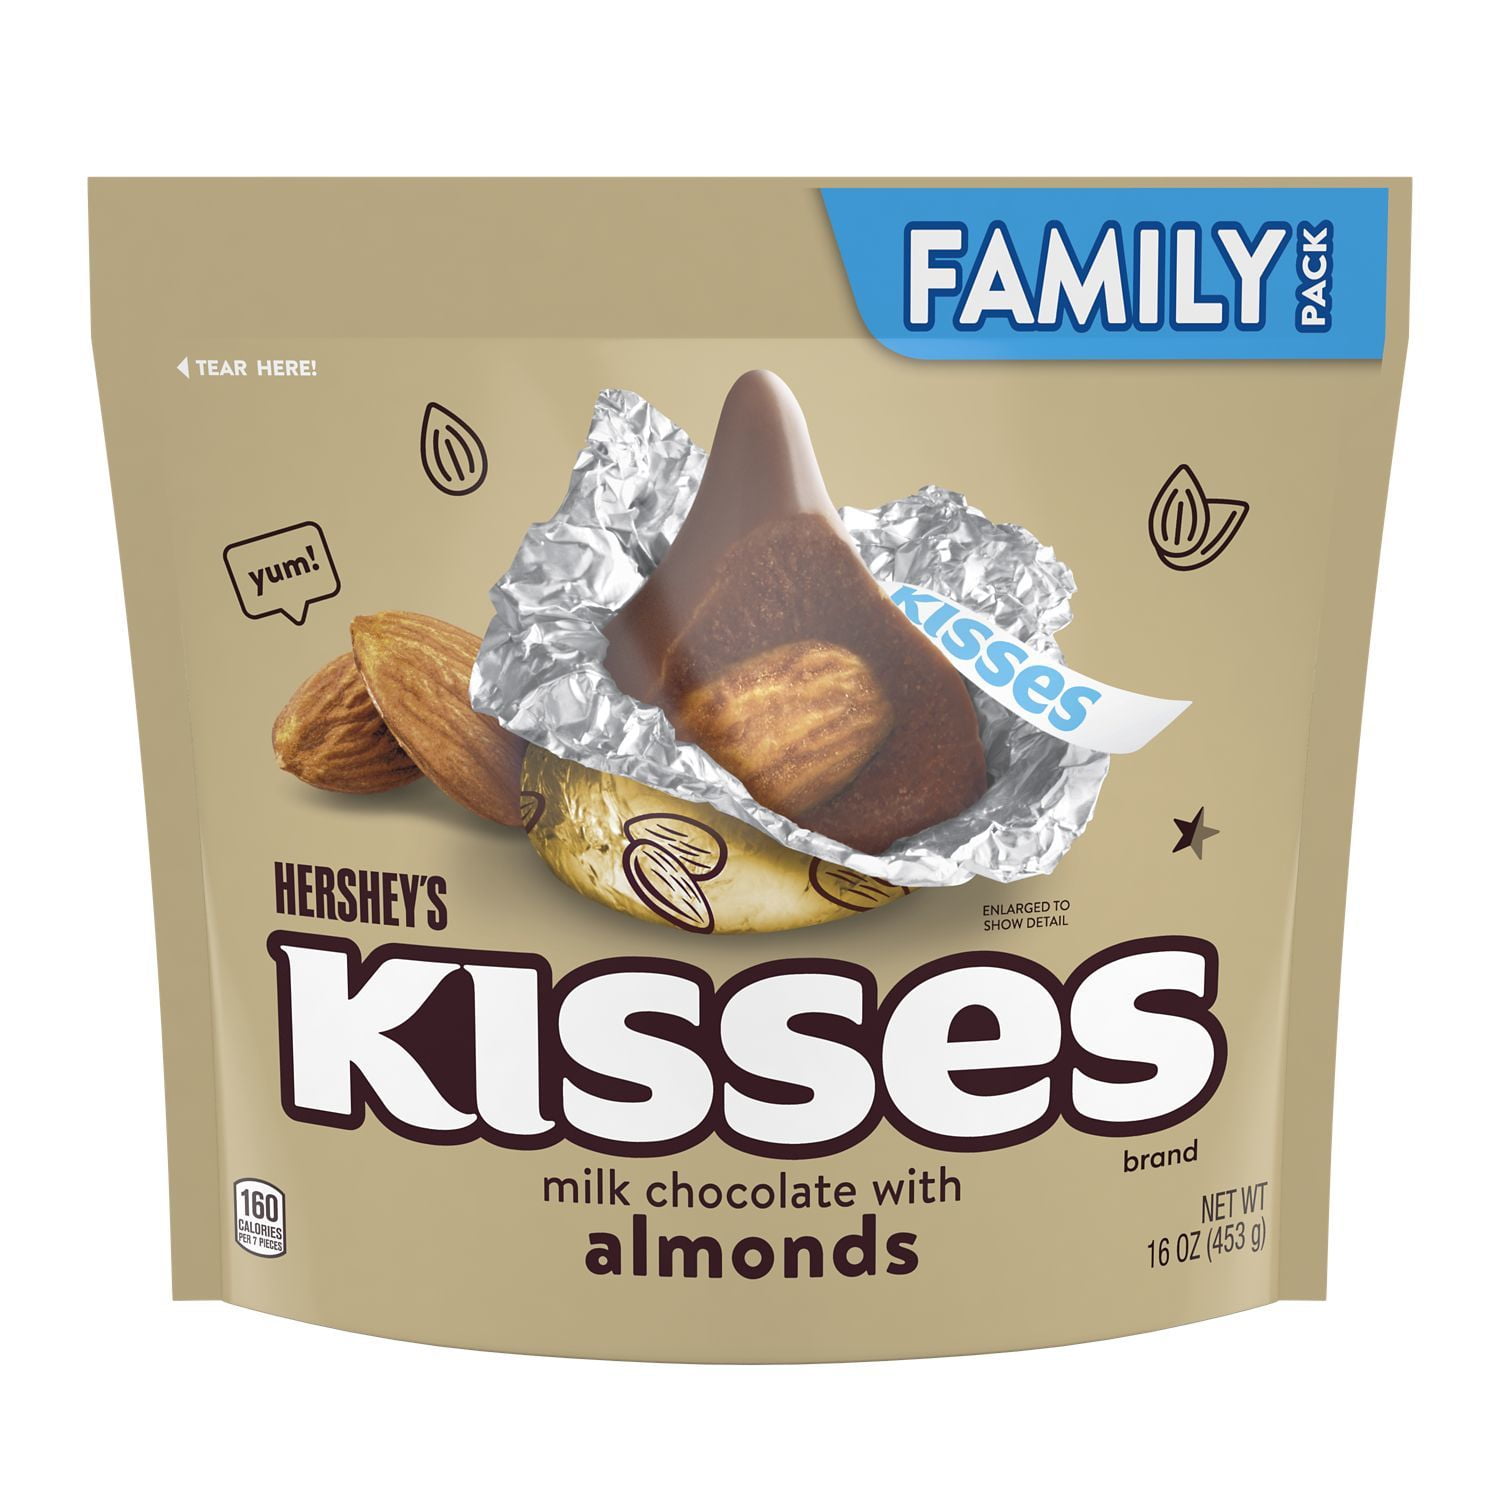 HERSHEY'S, KISSES Milk Chocolate with Almonds Candy, Individually Wrapped, 16 oz, Family Pack